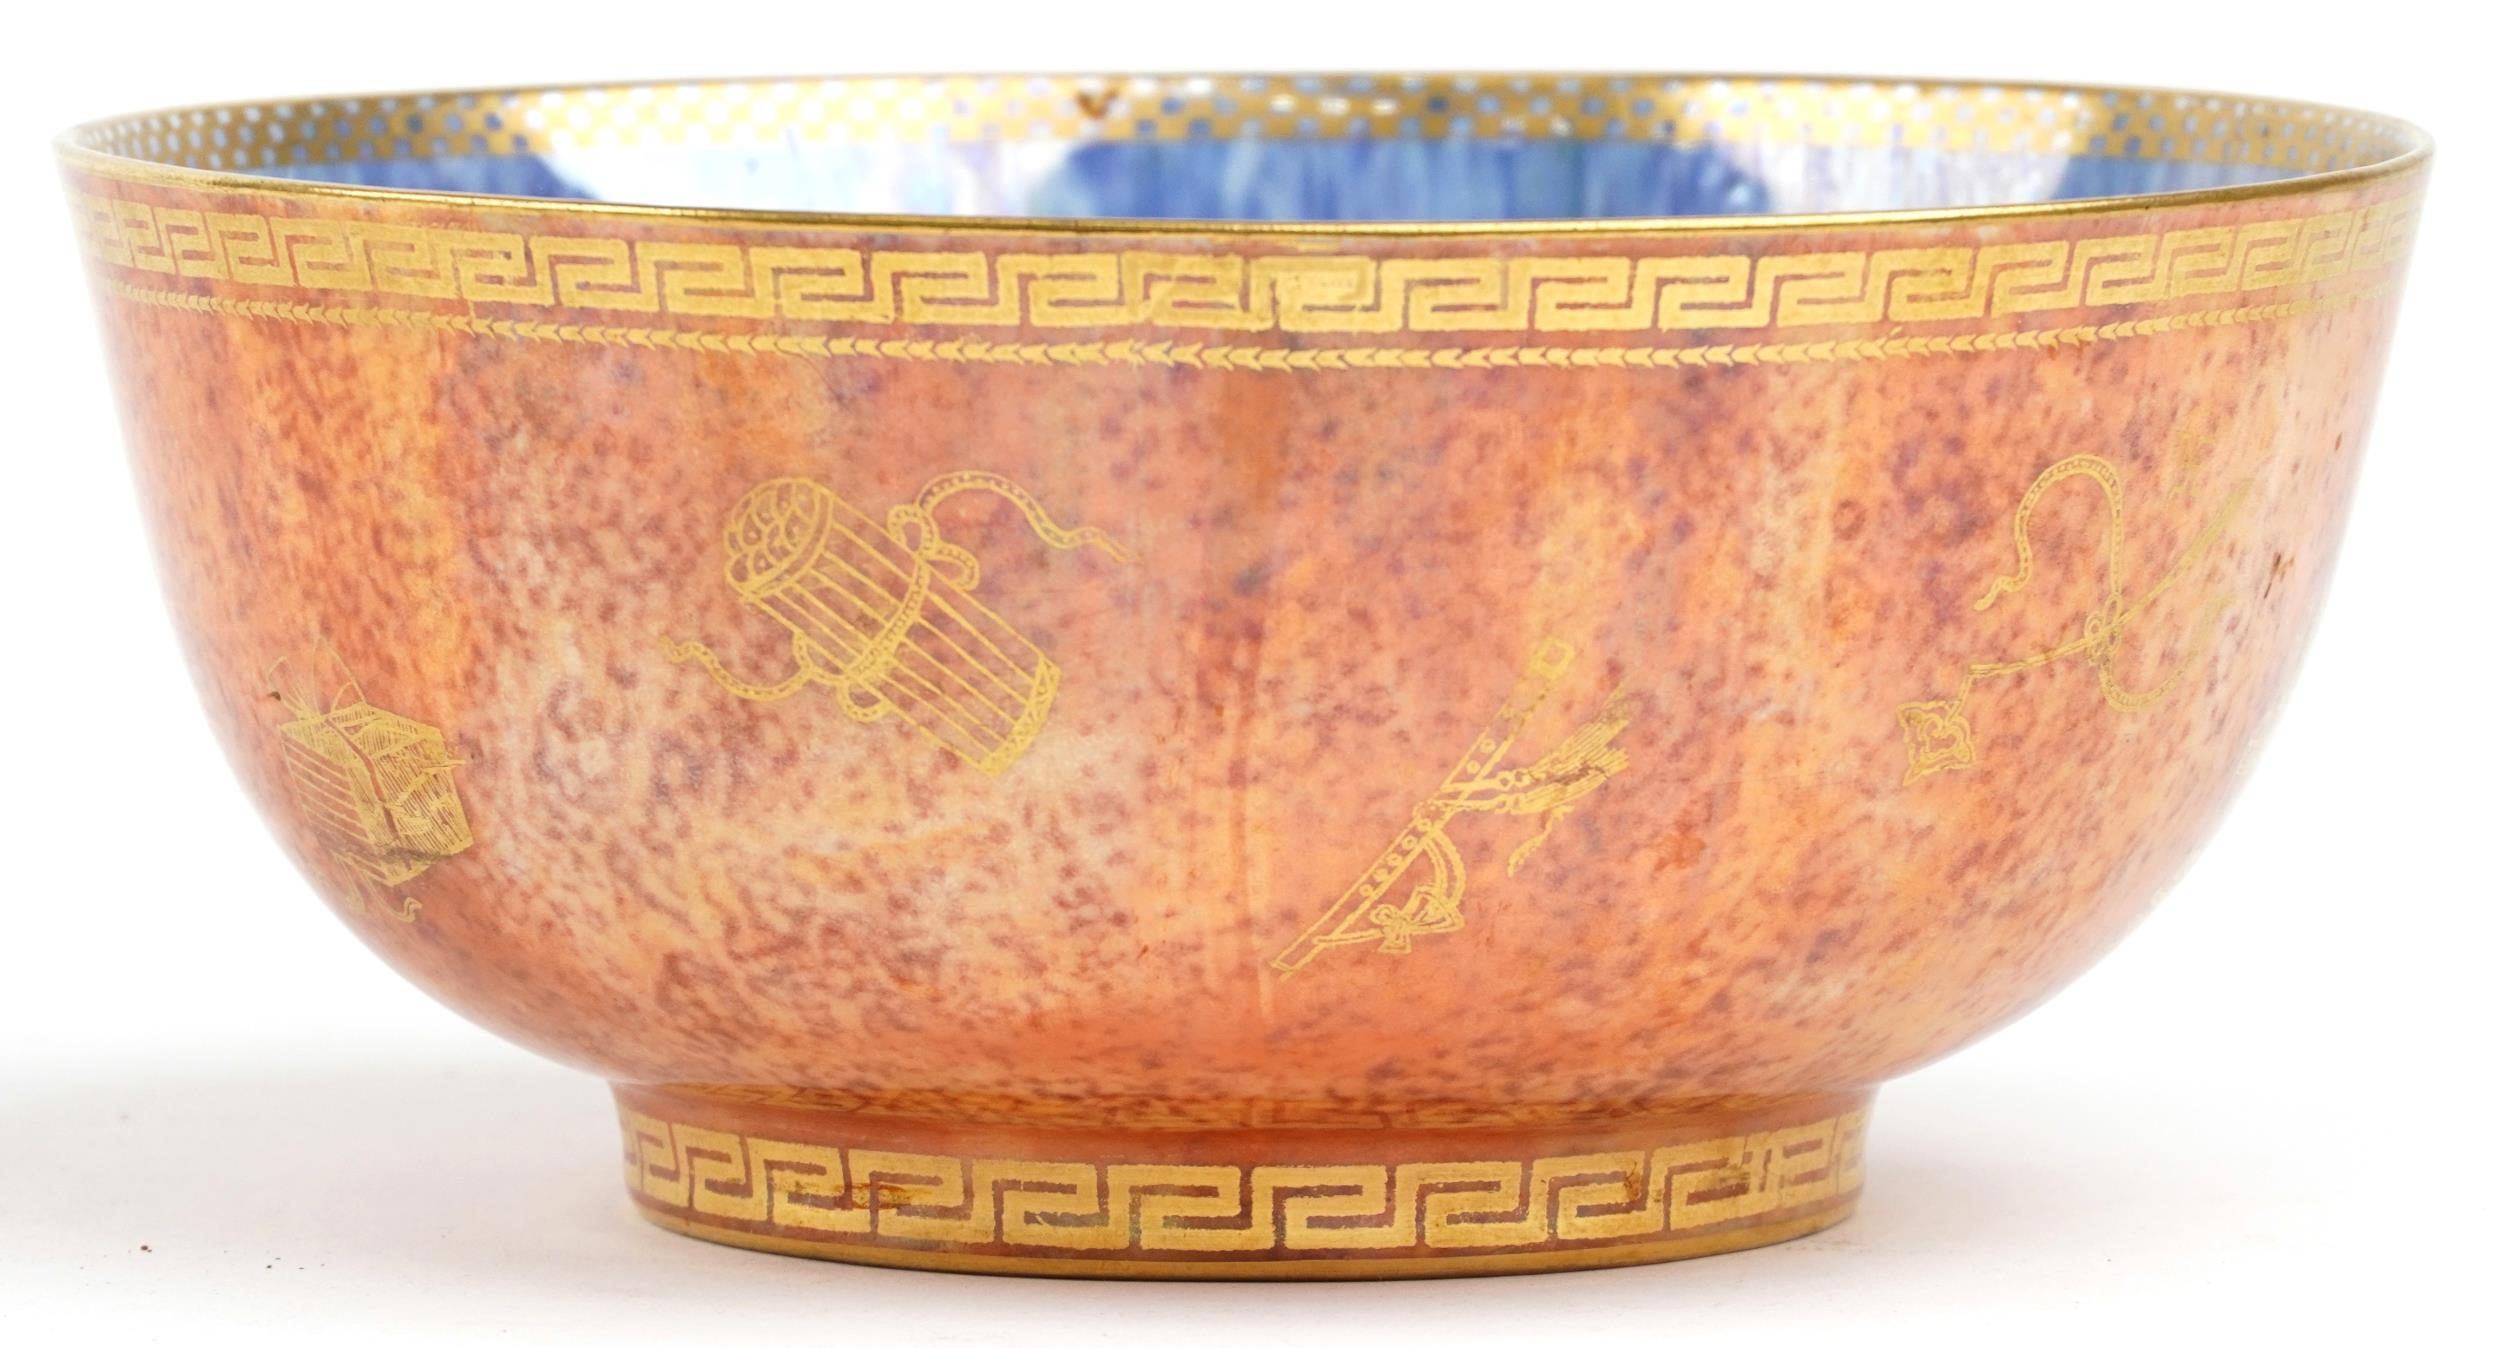 Wedgwood orange and blue ground Fairyland lustre bowl gilded with dragons chasing the flaming - Image 3 of 7